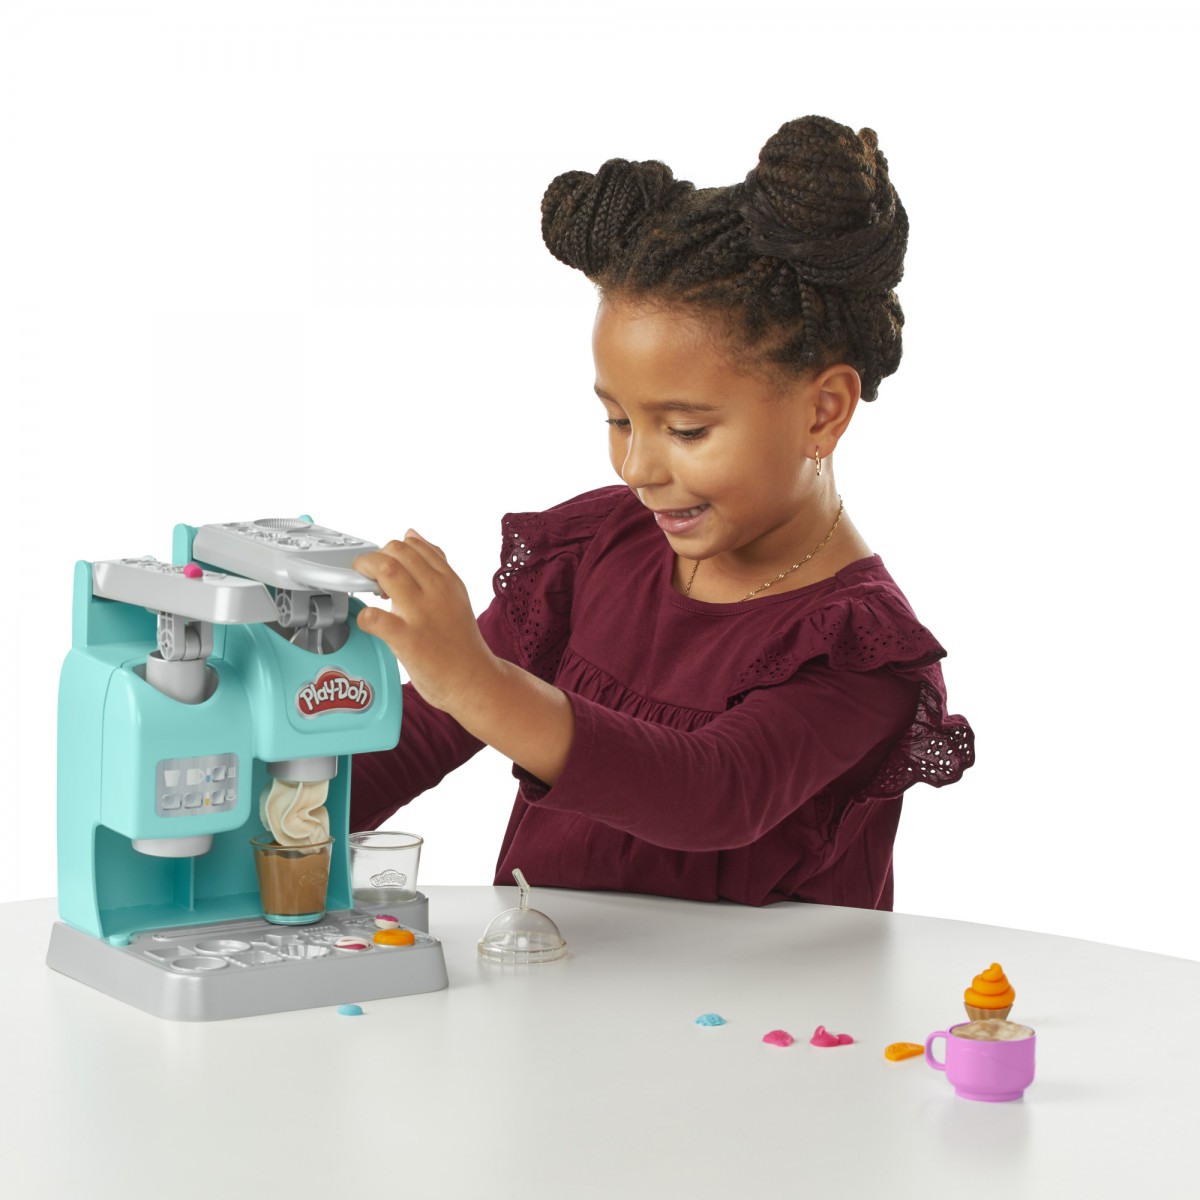 Play-Doh Kitchen Creations Super Colorful cafe